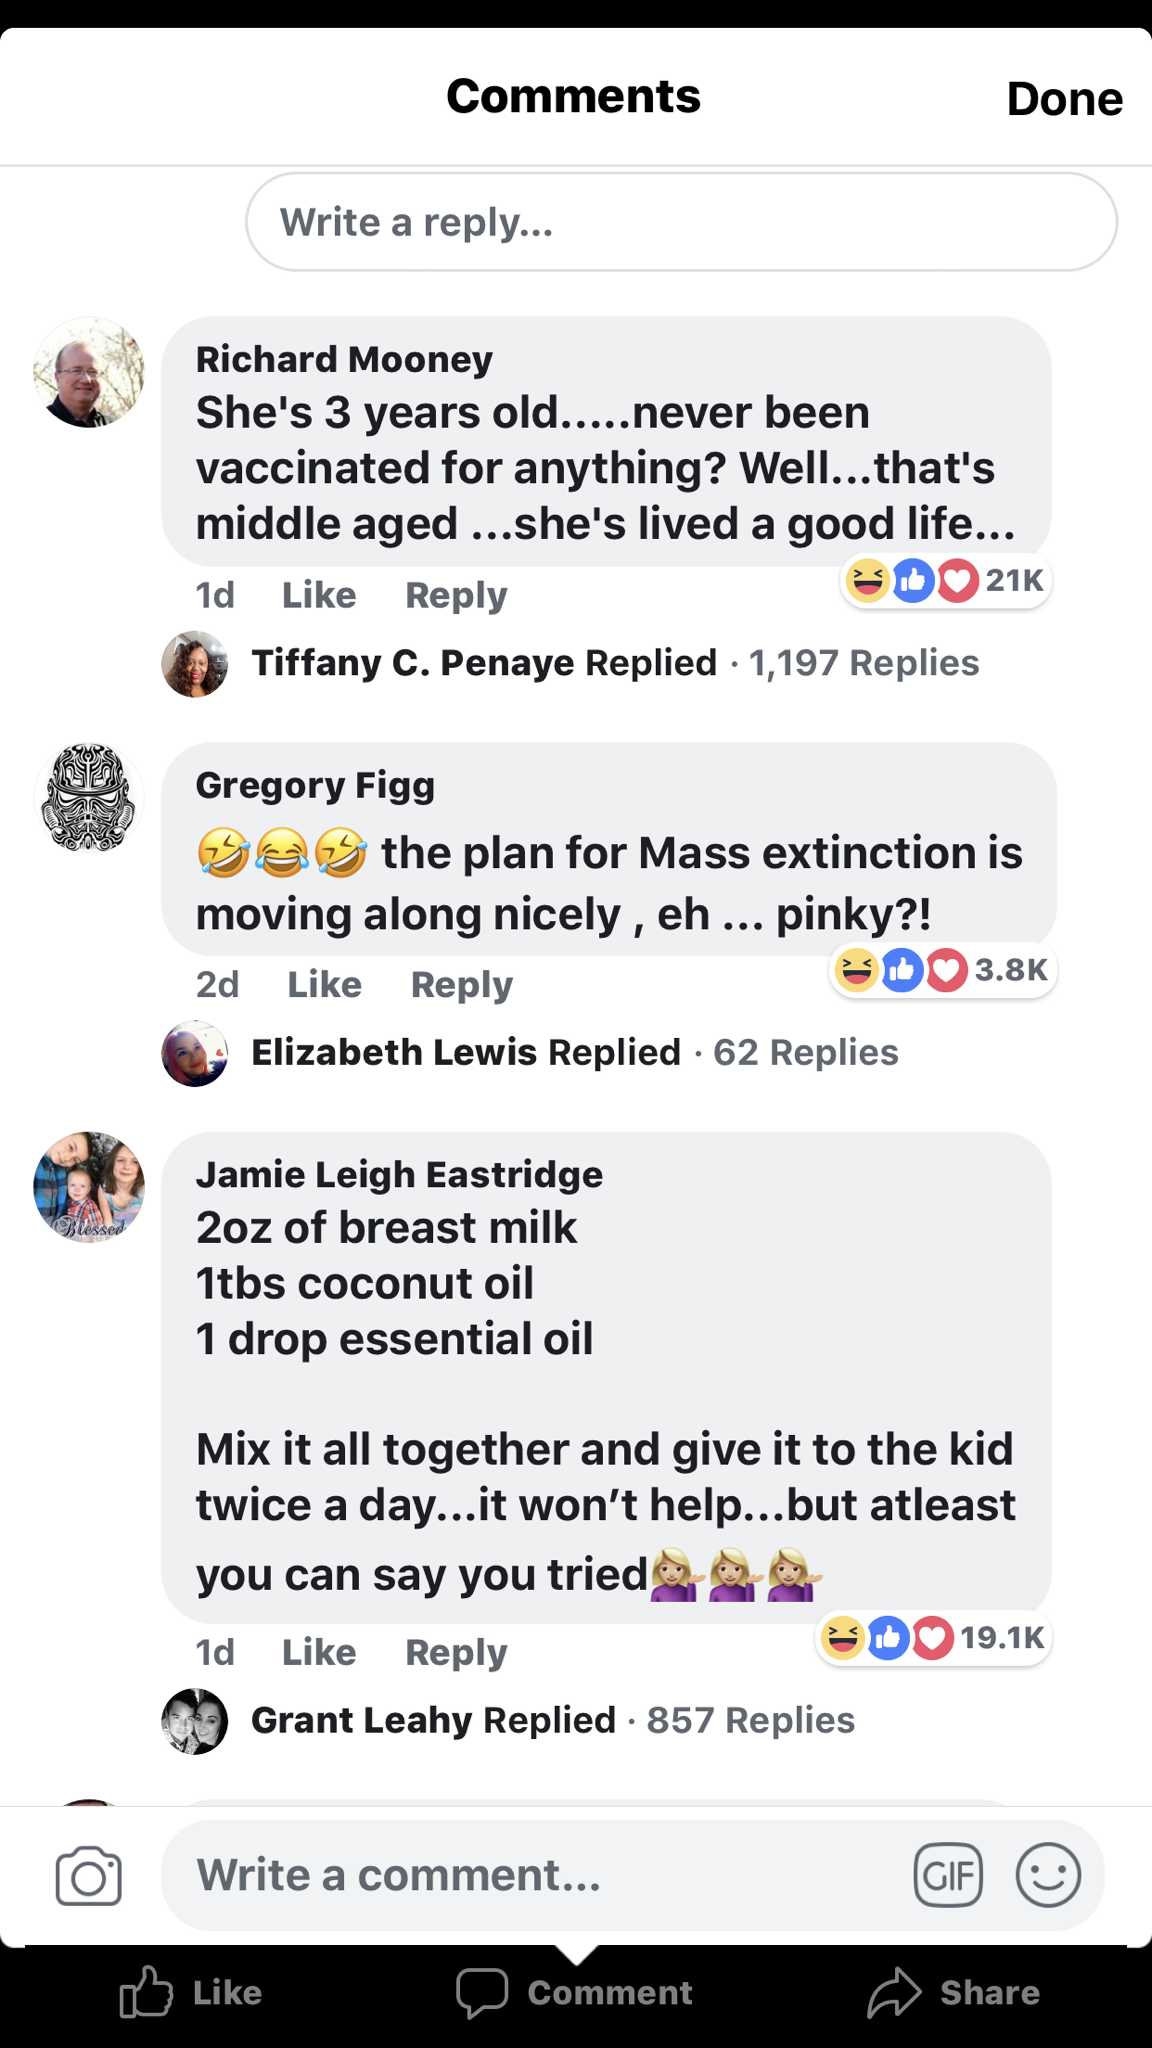 Anti-vax mom asks internet for help to protect her kid from measles outbreak